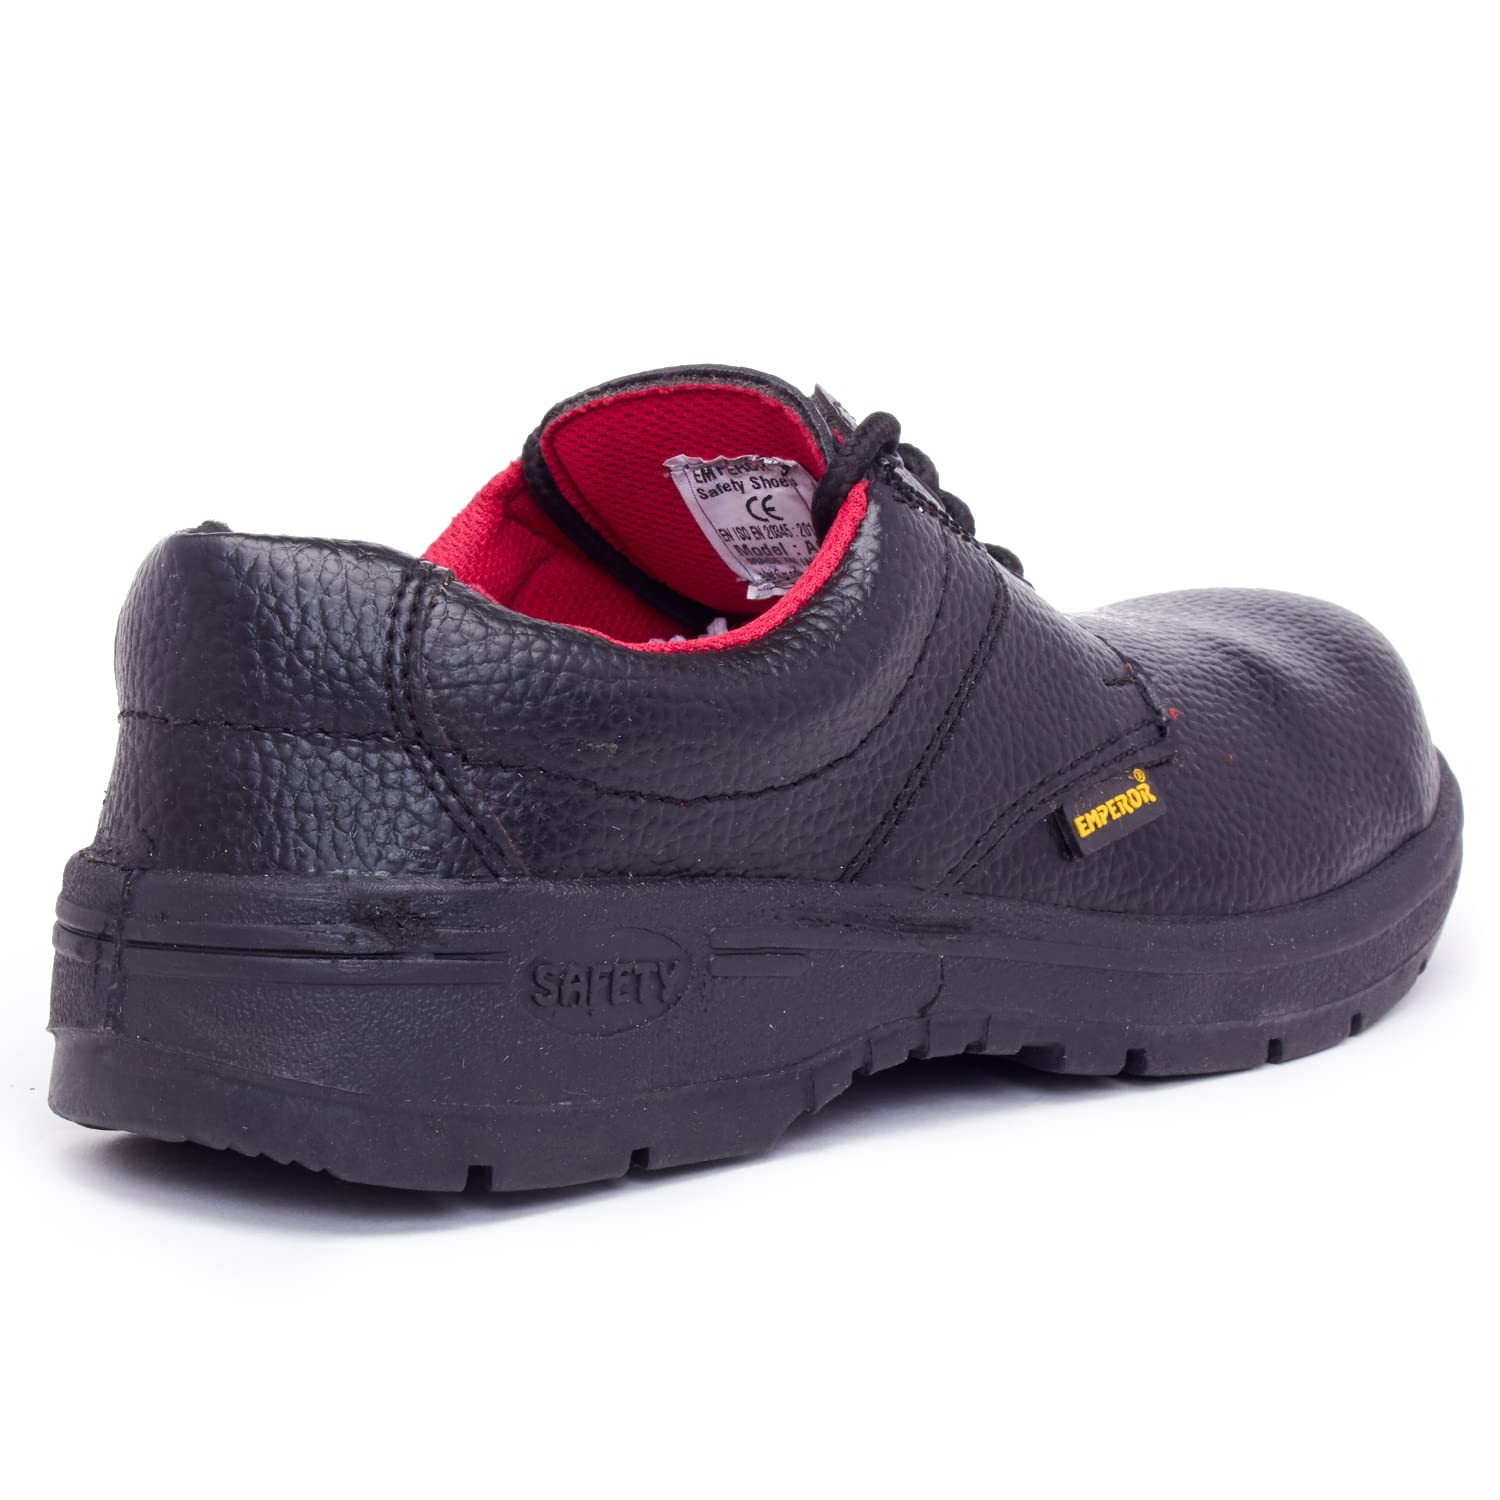 Emperor Steel Toe Leather Safety Shoe ACE